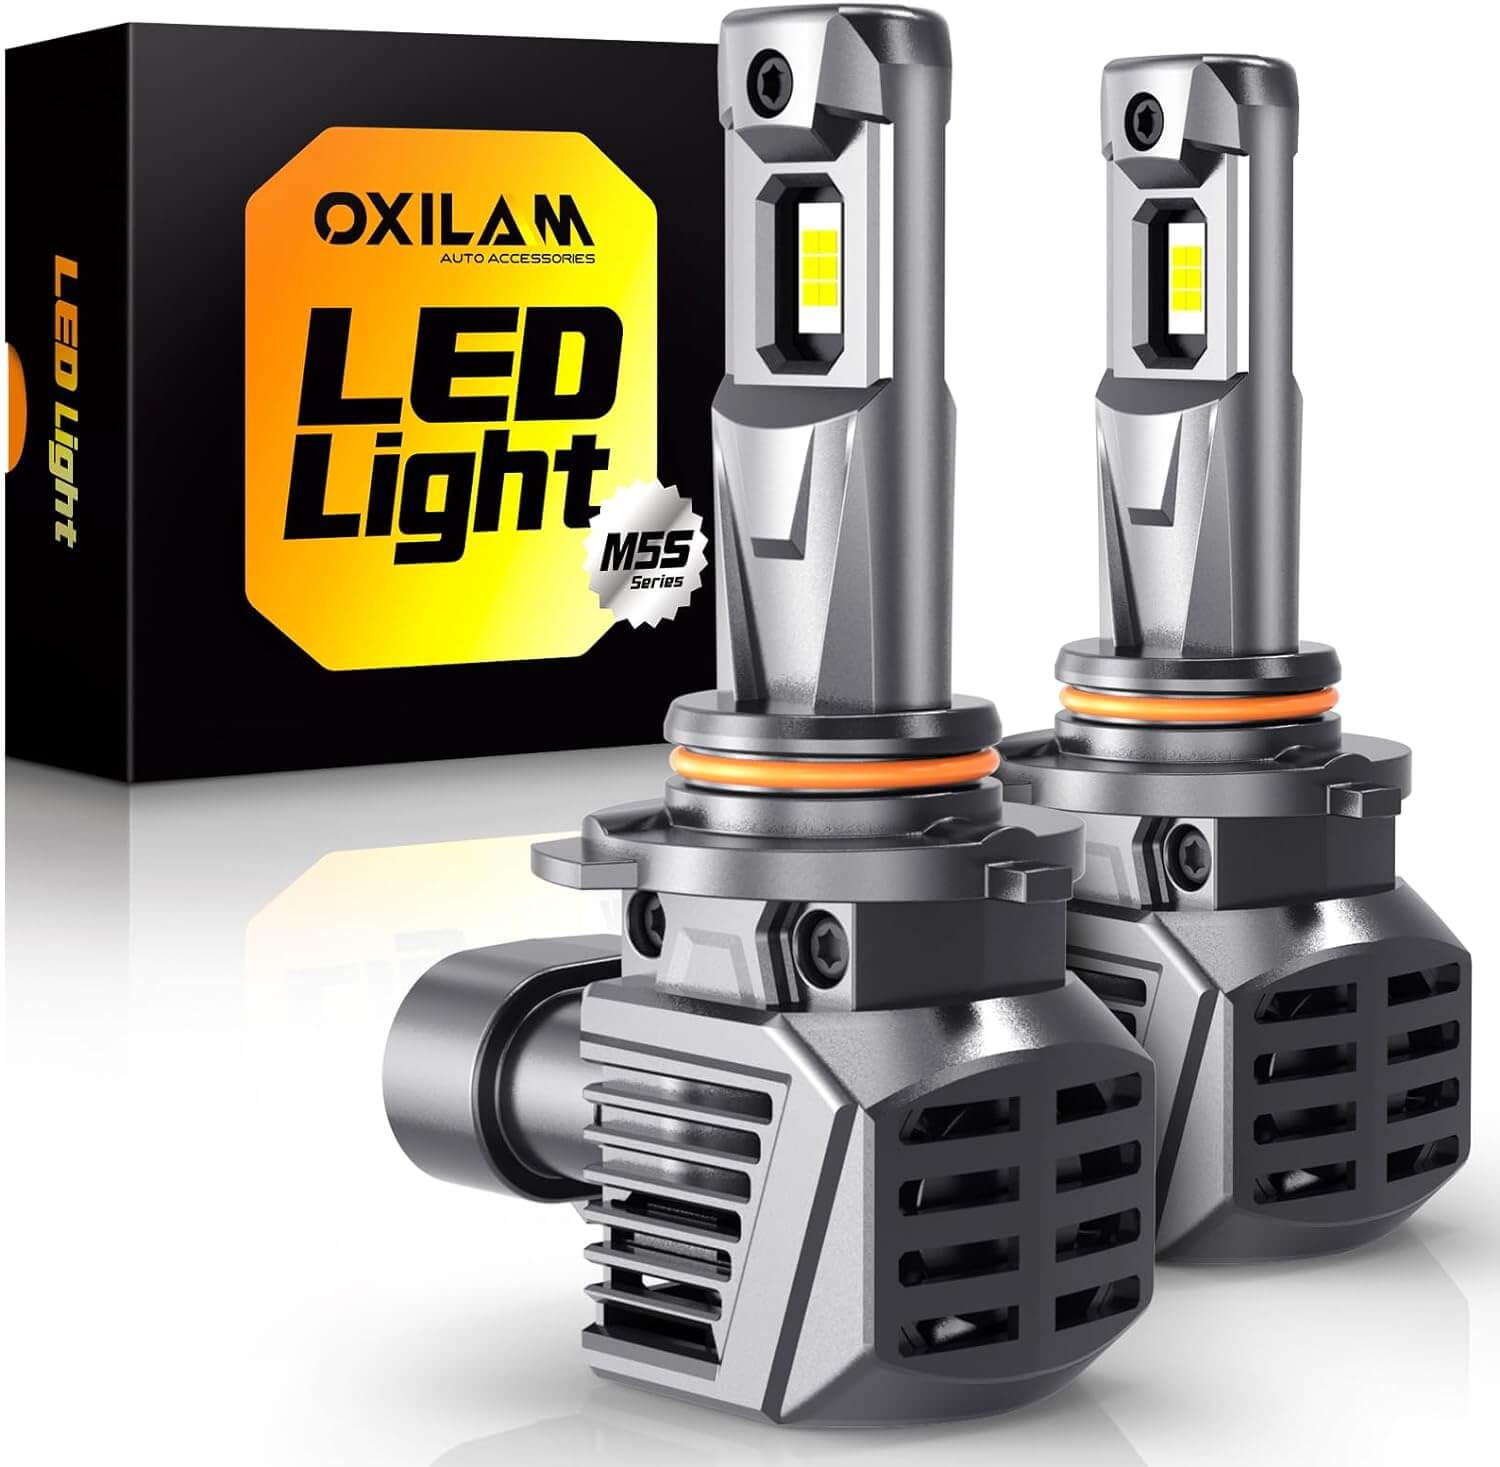 Oxilam Motor Vehicle Lighting OXILAM 2024 Upgraded 9005 HB3 LED Headlight Bulbs 26000LM 120W 700% Brighter